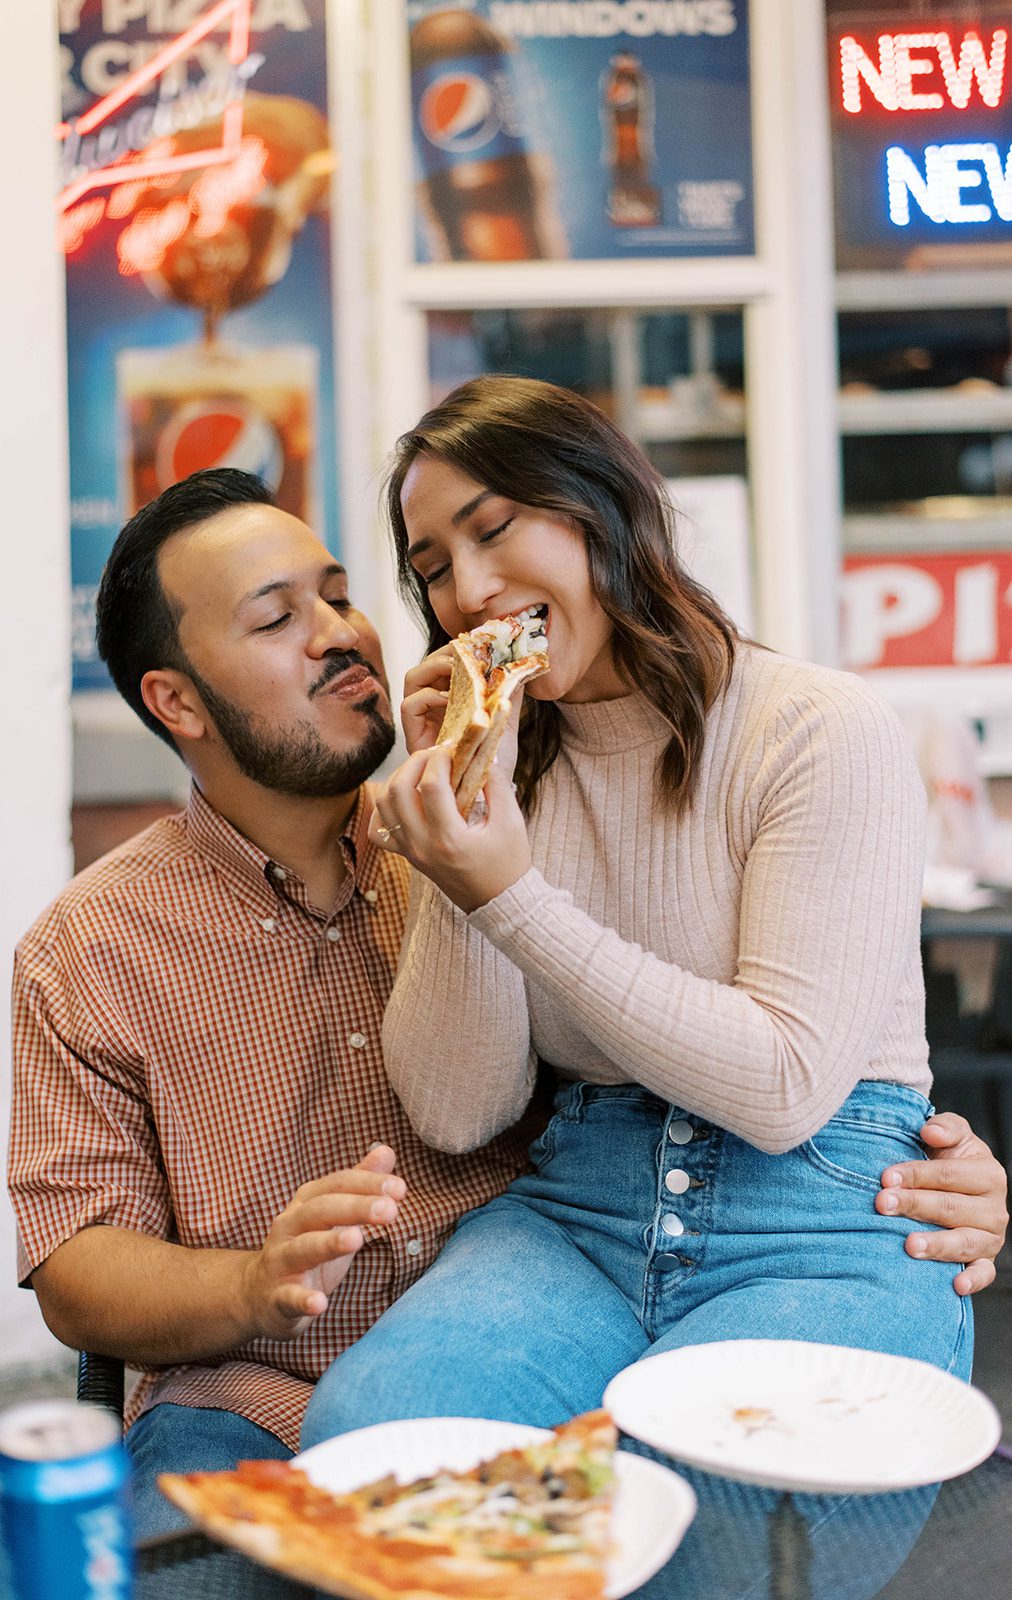 Ybor City pizza shop with man and woman eating pizza together for their engagement session while smiling in their casual attire